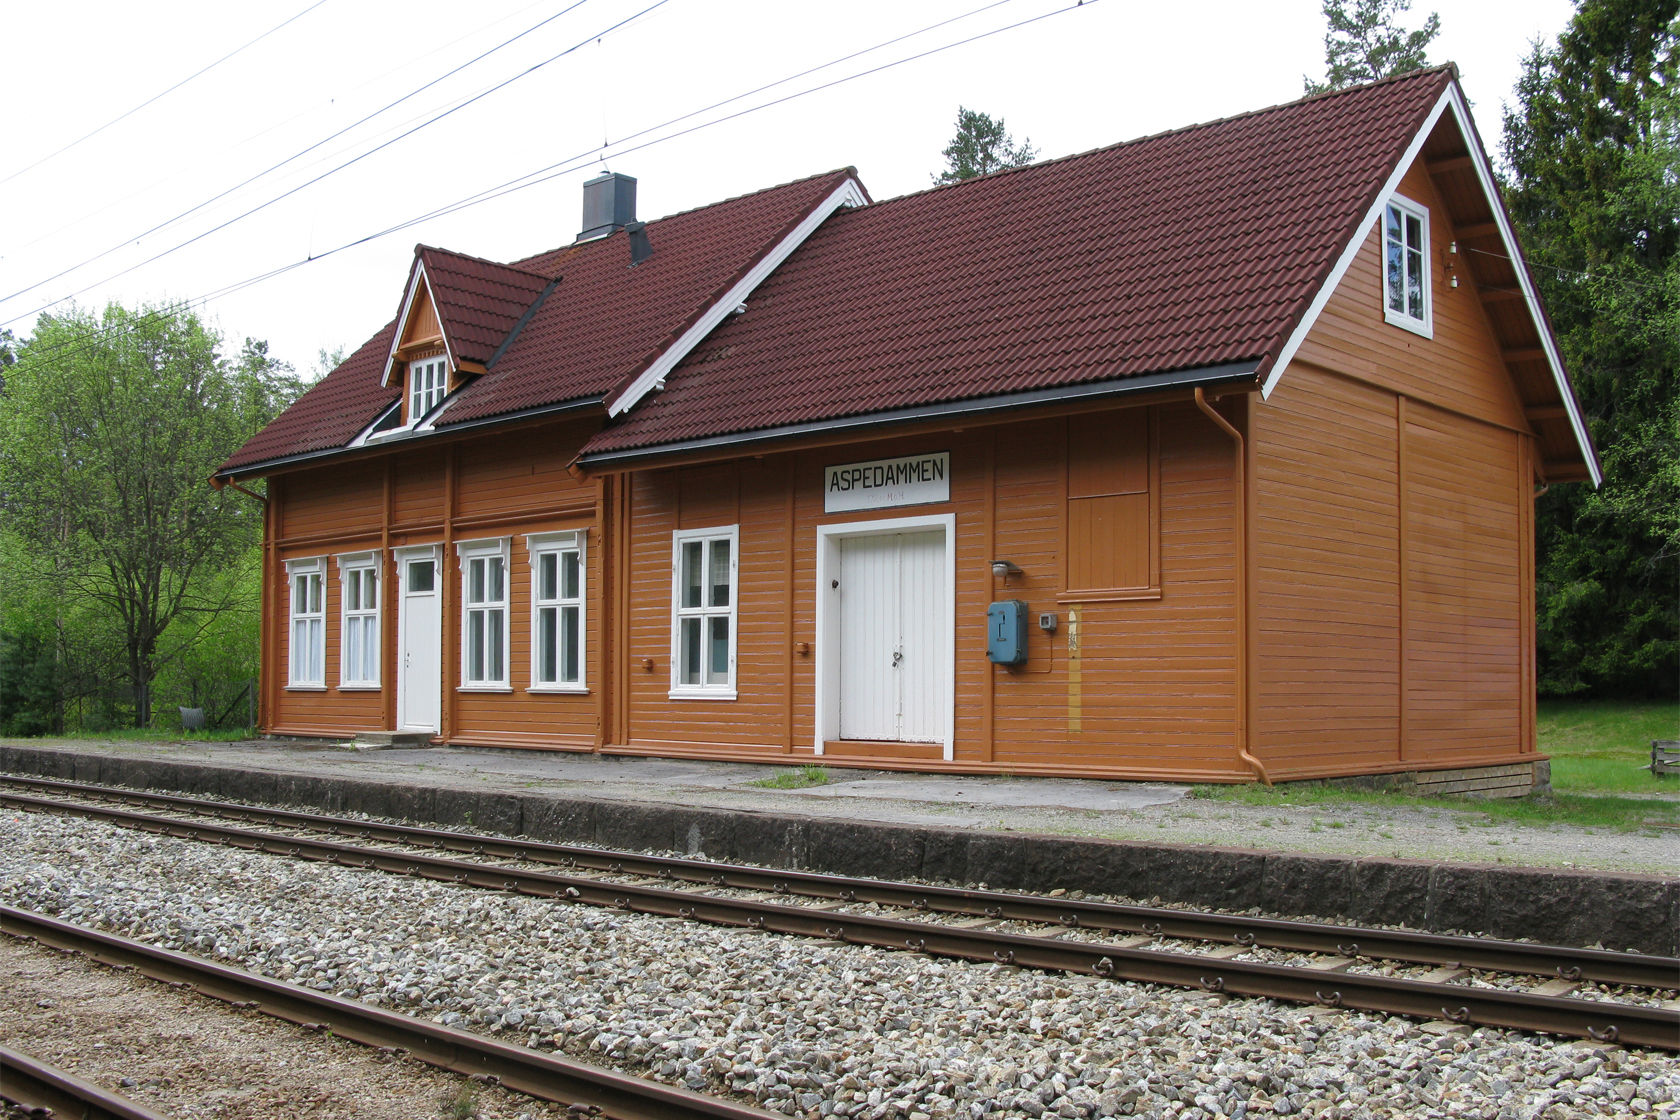 Aspedammen station building with tracks in front.